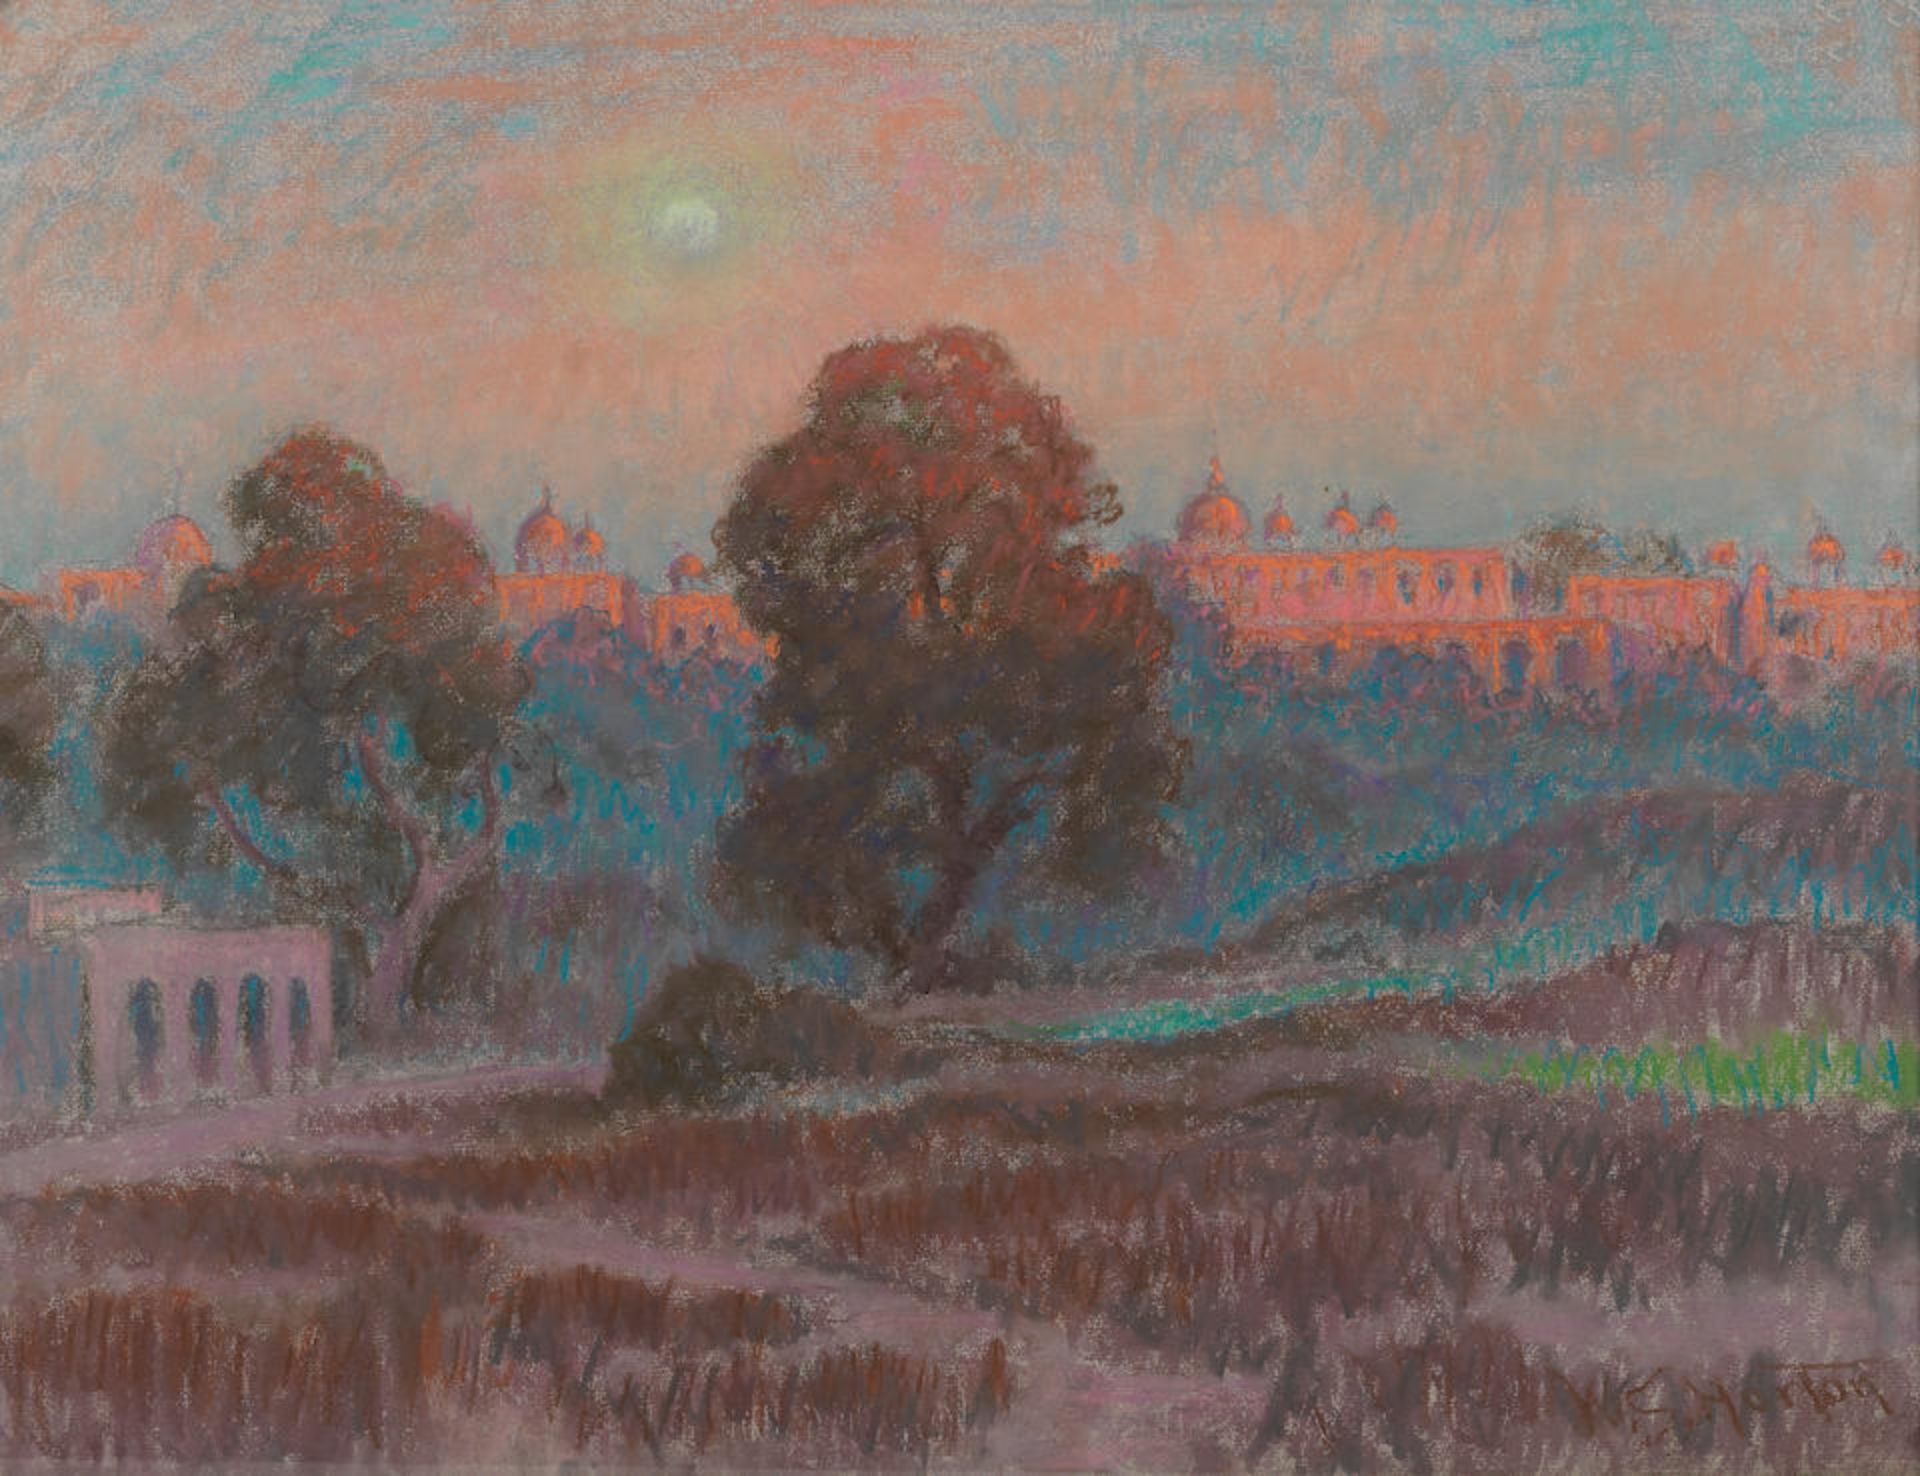 William Samuel Horton (American, 1865-1936) A sunset view in India, thought to depict the Red Fo...